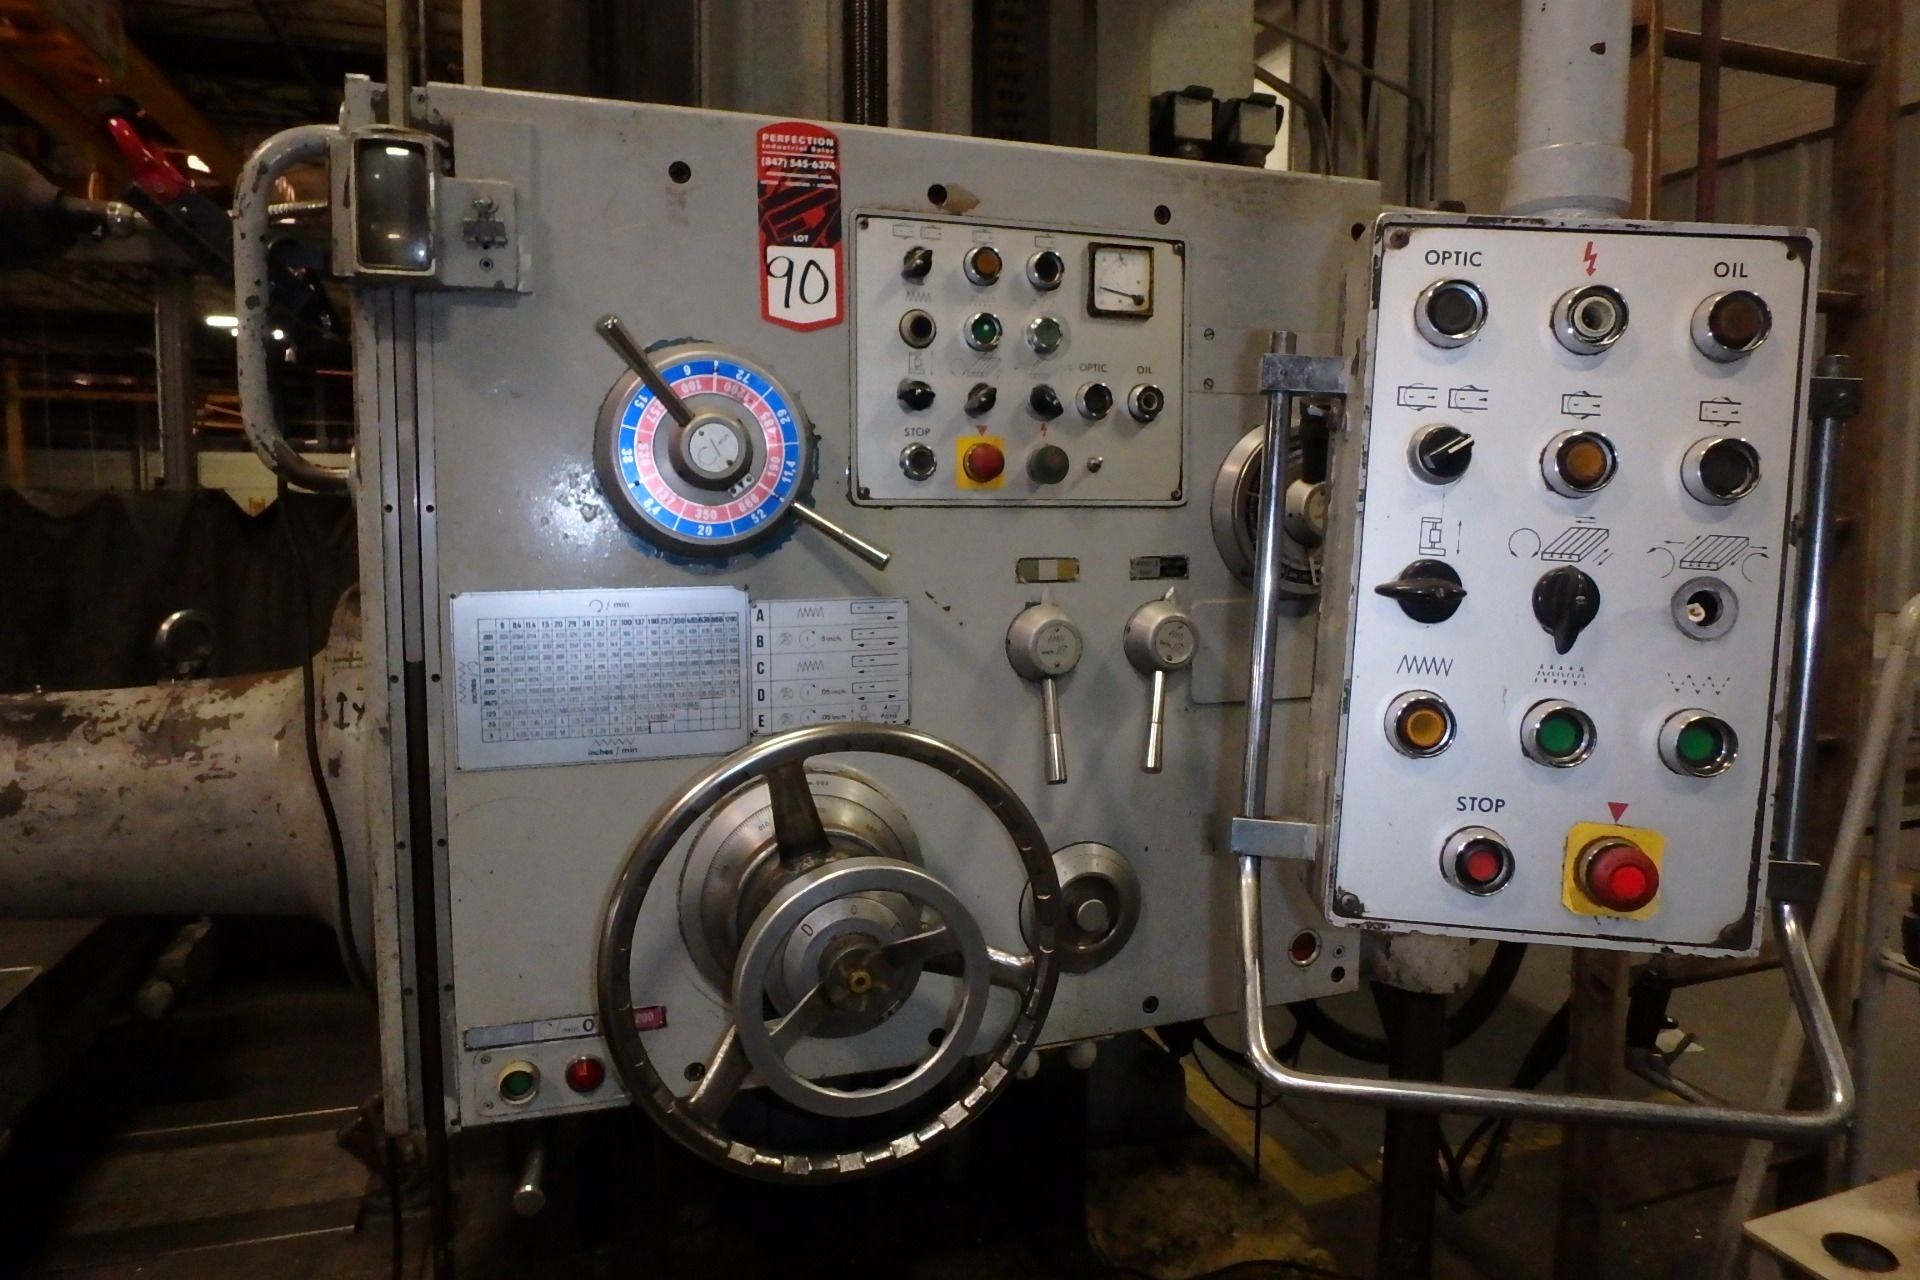 5" SACEM MST 130 Horizontal Table Type Boring Mill, s/n 1141, w/ 78.75" x 63" Built-In Rotary Table, - Image 2 of 8